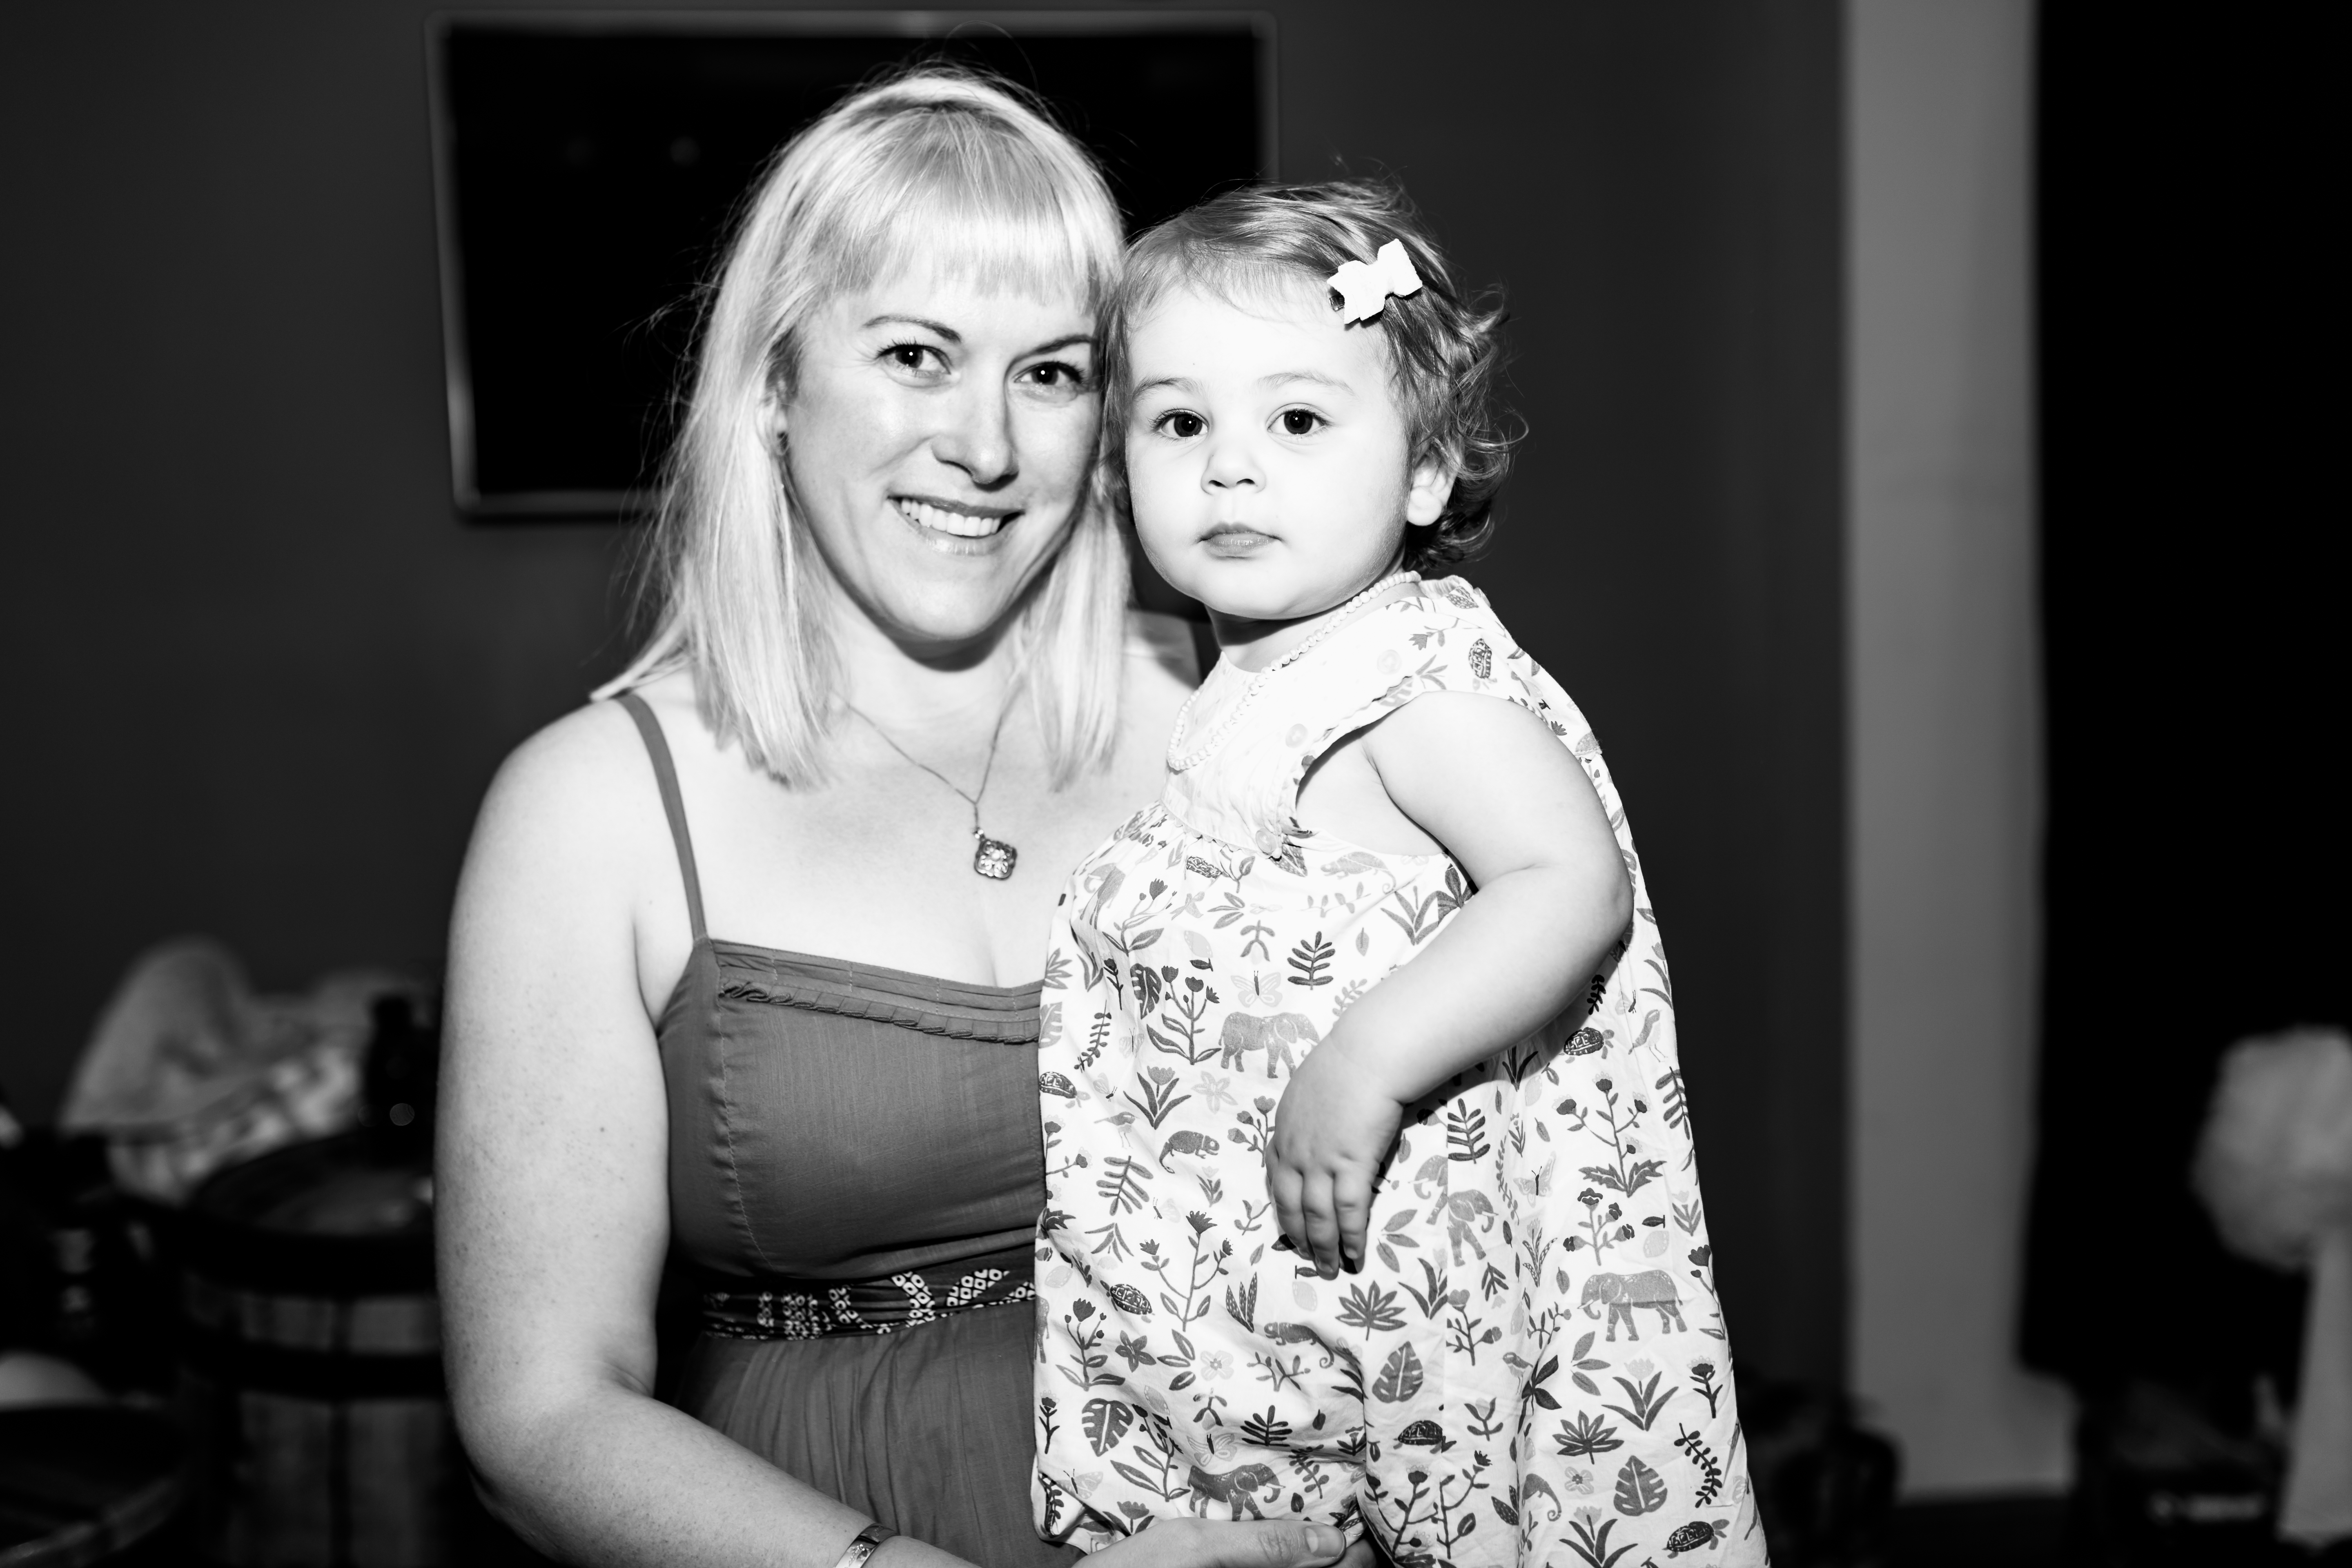 full weekend, fun Monday, black and white, mother daughter, first birthday, first birthday party, birthday party, Texas Jack's, northern Virginia